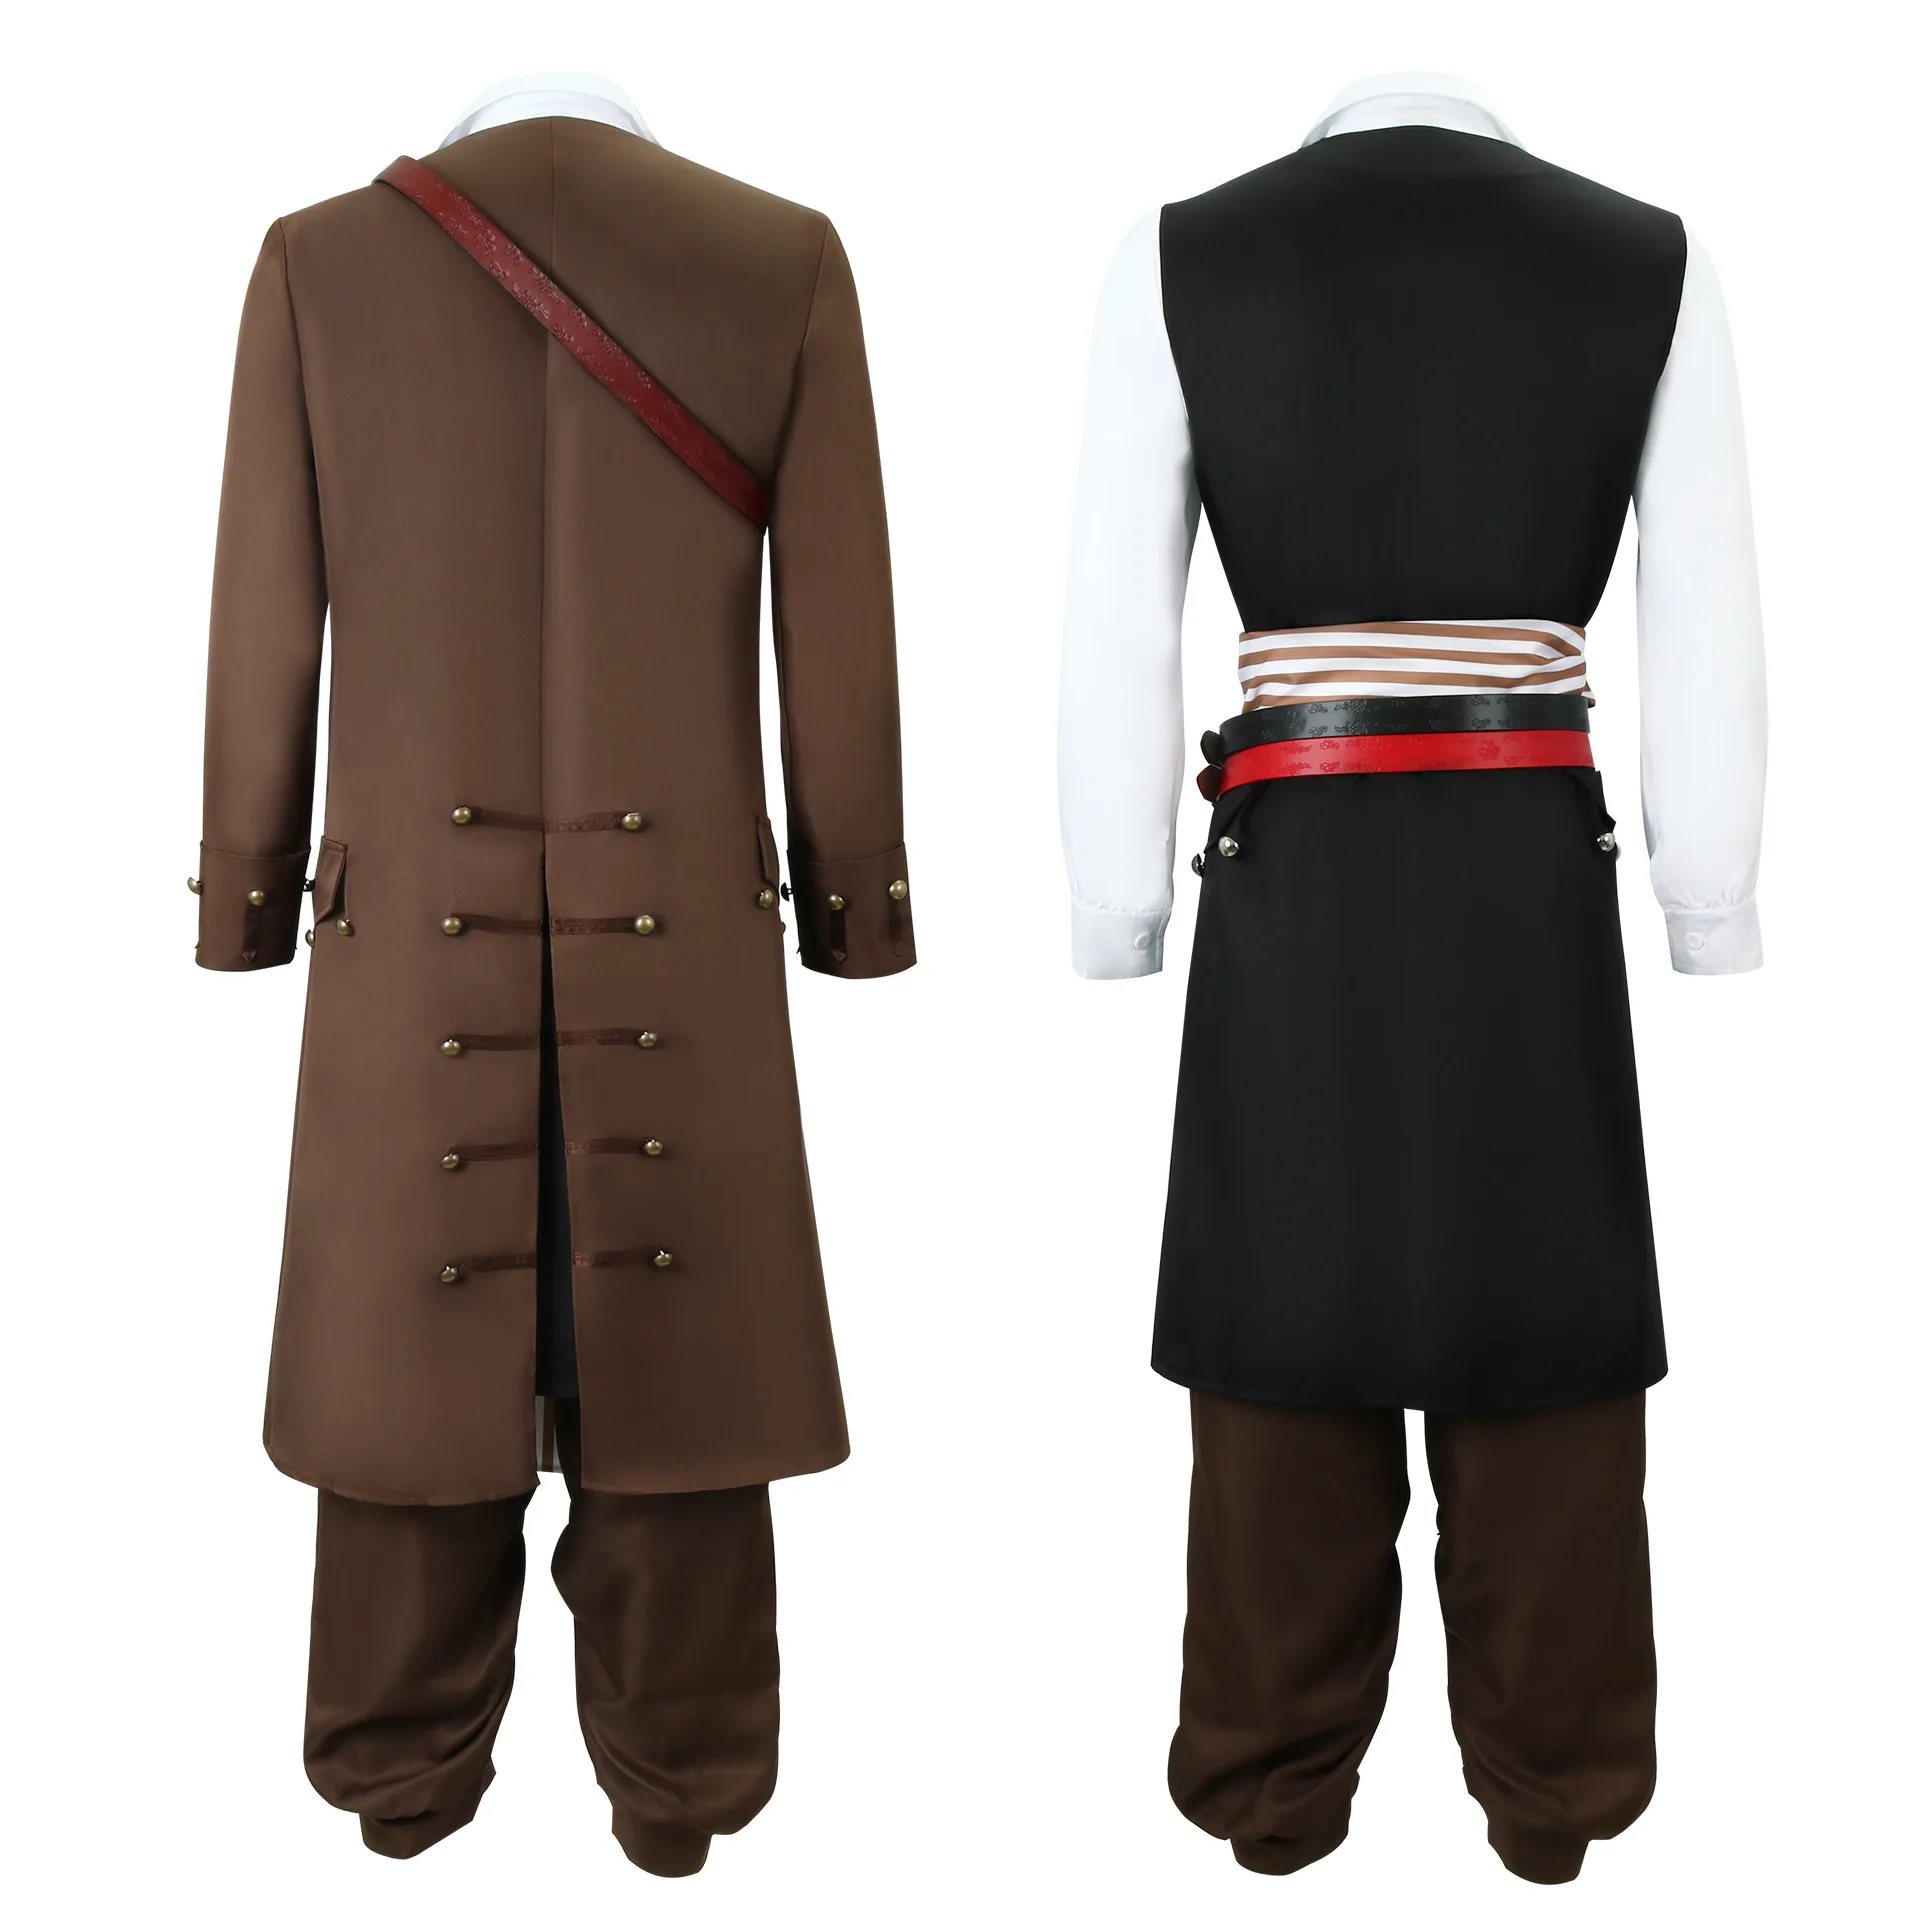 Movie Pirates of the Caribbean Cosplay Costume Captain Jack Sparrow COS Full Suit Set Halloween Party Performance Wear for Men